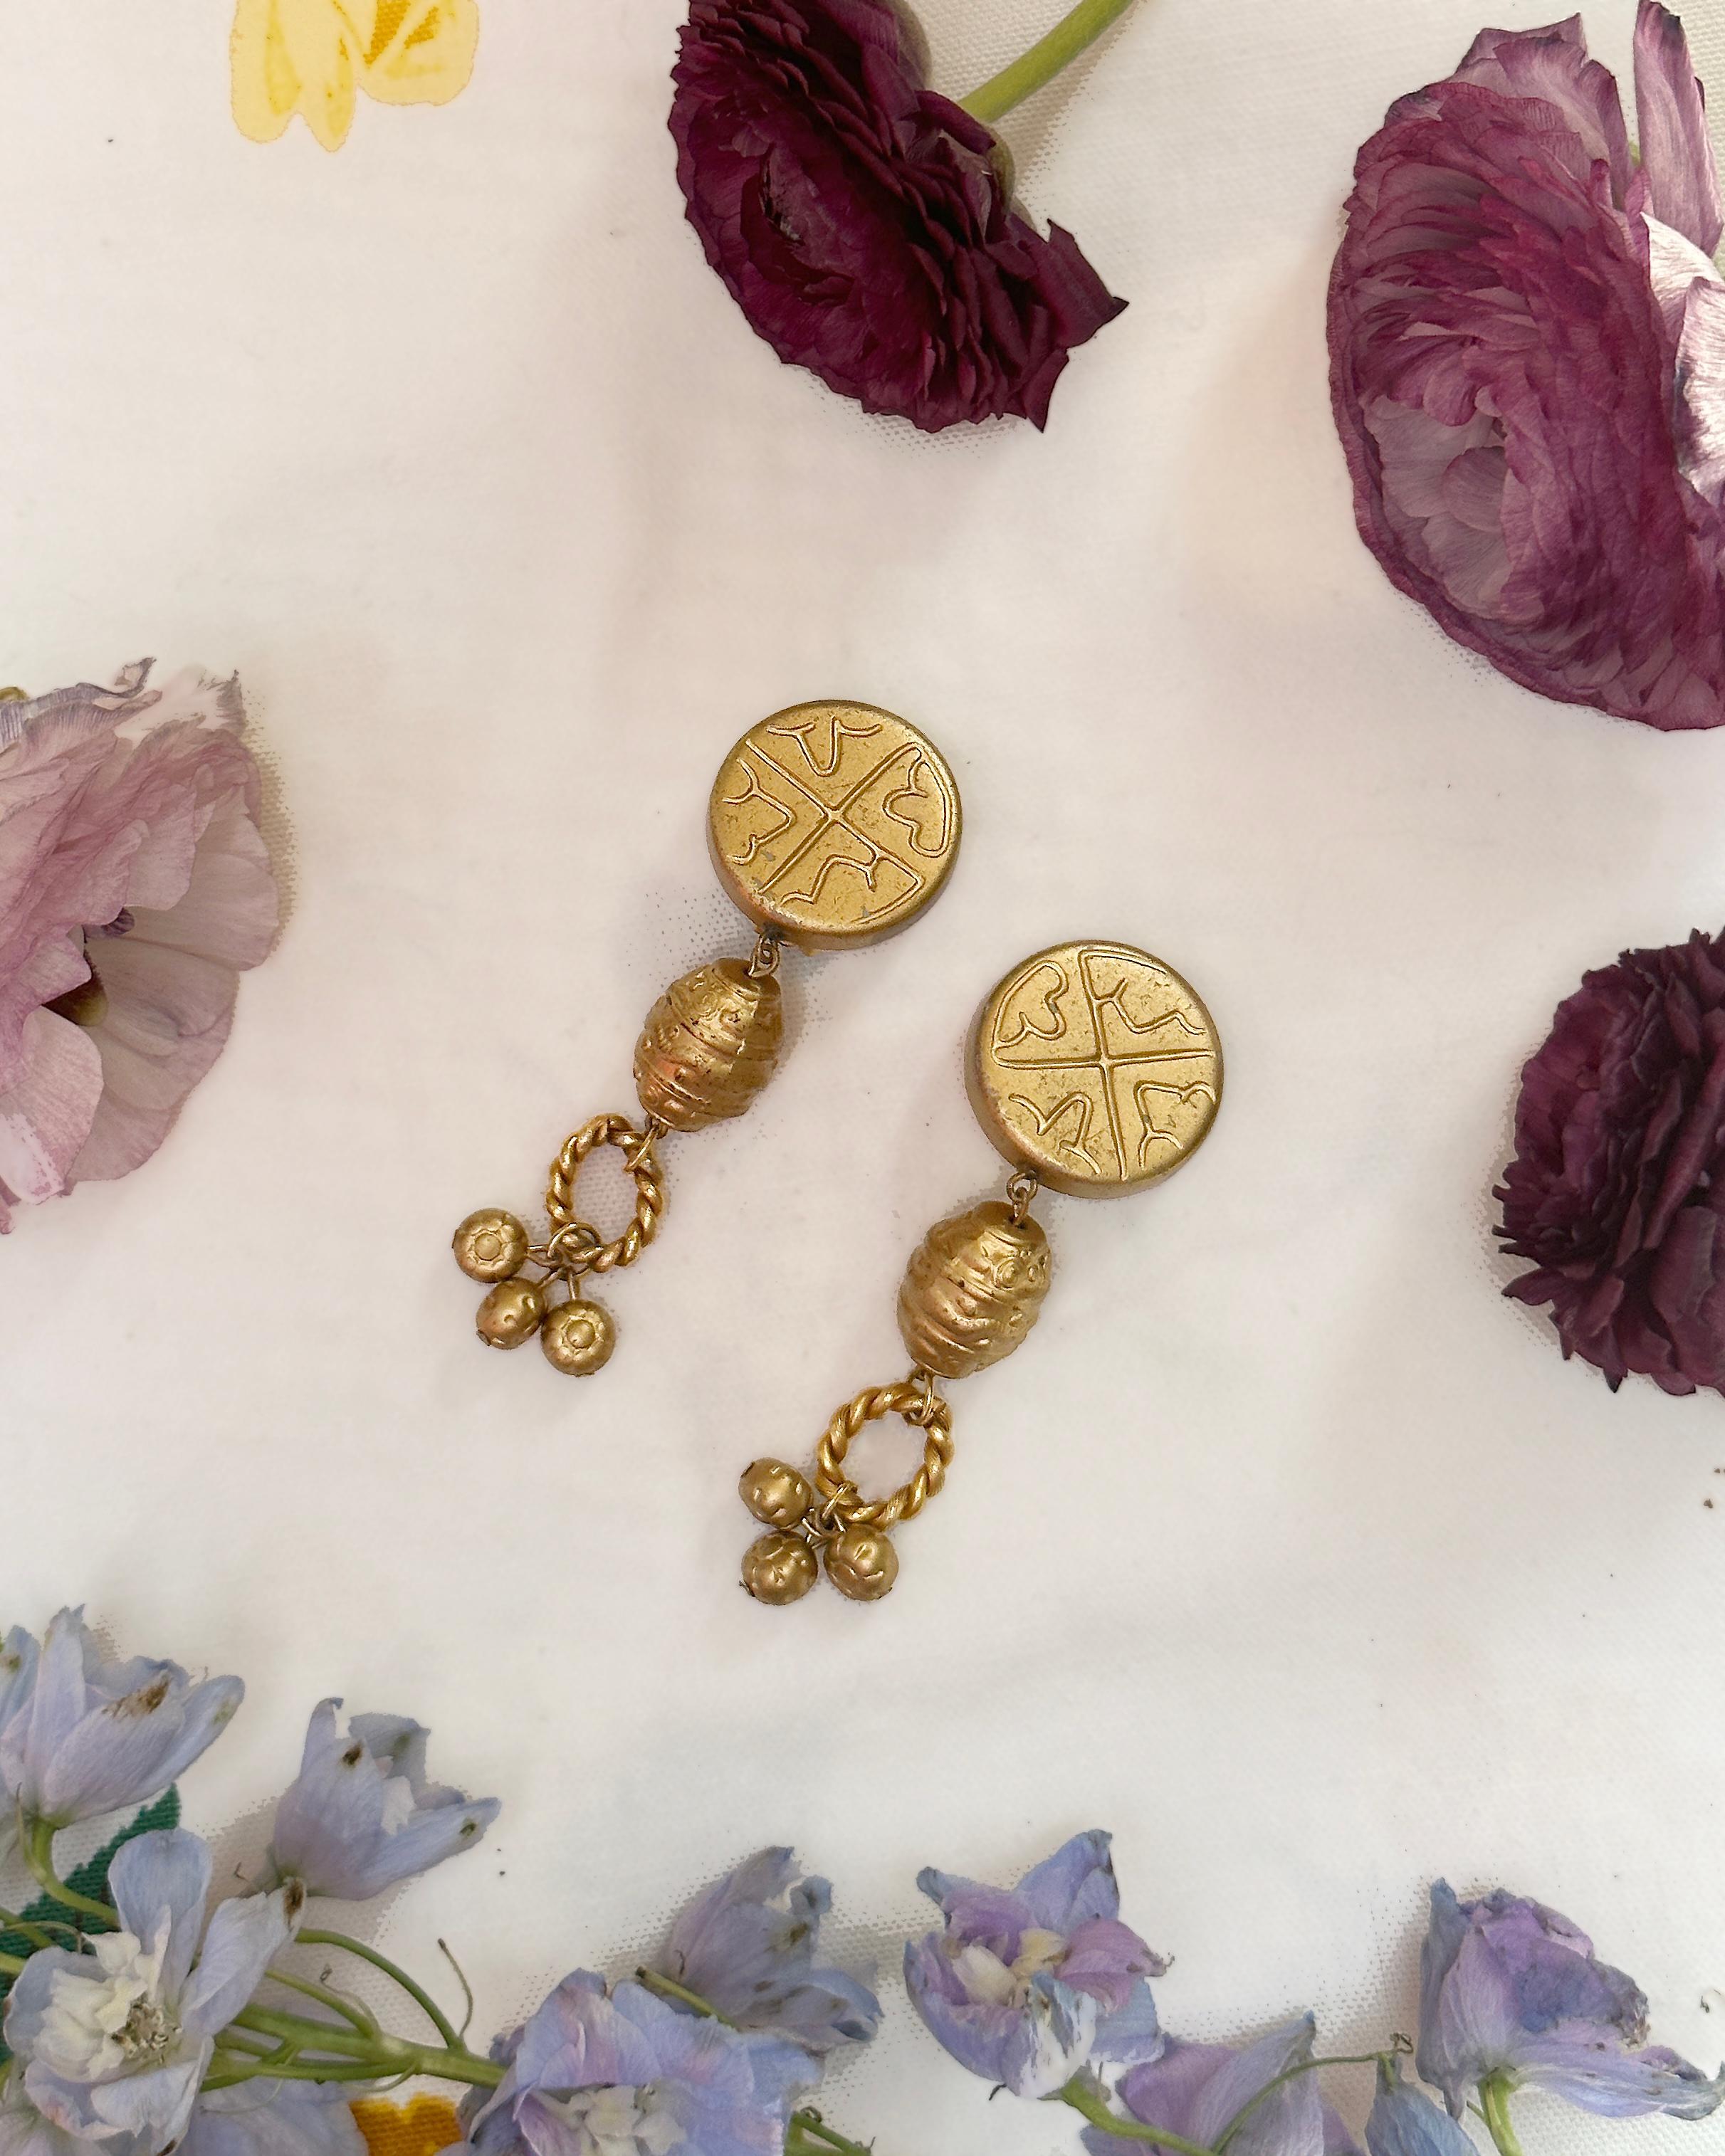 These vintage gold statement earrings were made by Les Bernard in the 1980s. The etching and sculptural details are a marriage of Etruscan and Pre-Columbian jewelry styles. I love that each individual drop and charm connects on its own ring,